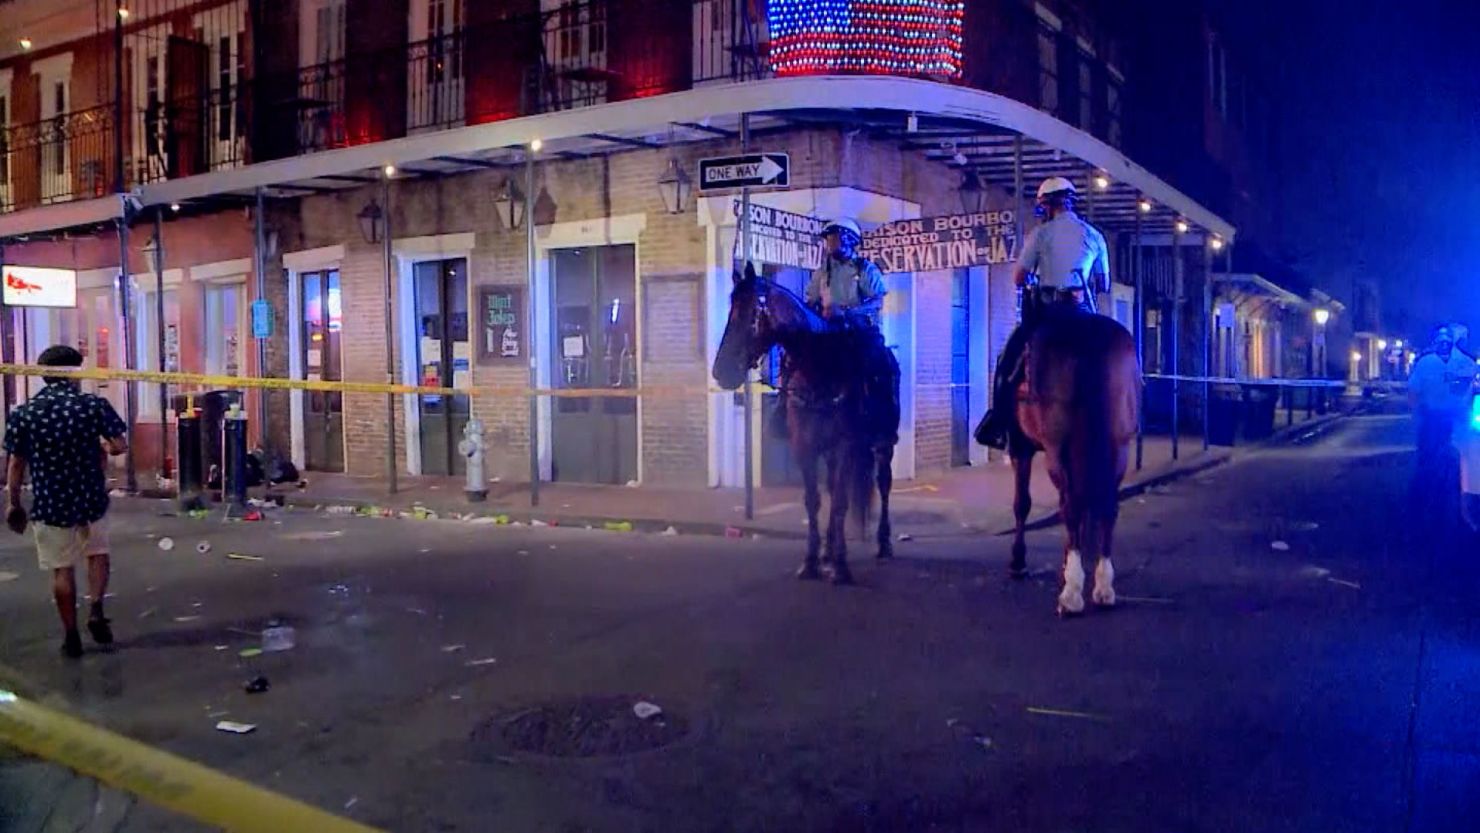 Five people were wounded in a shooting near Bourbon Street in New Orleans early Sunday.